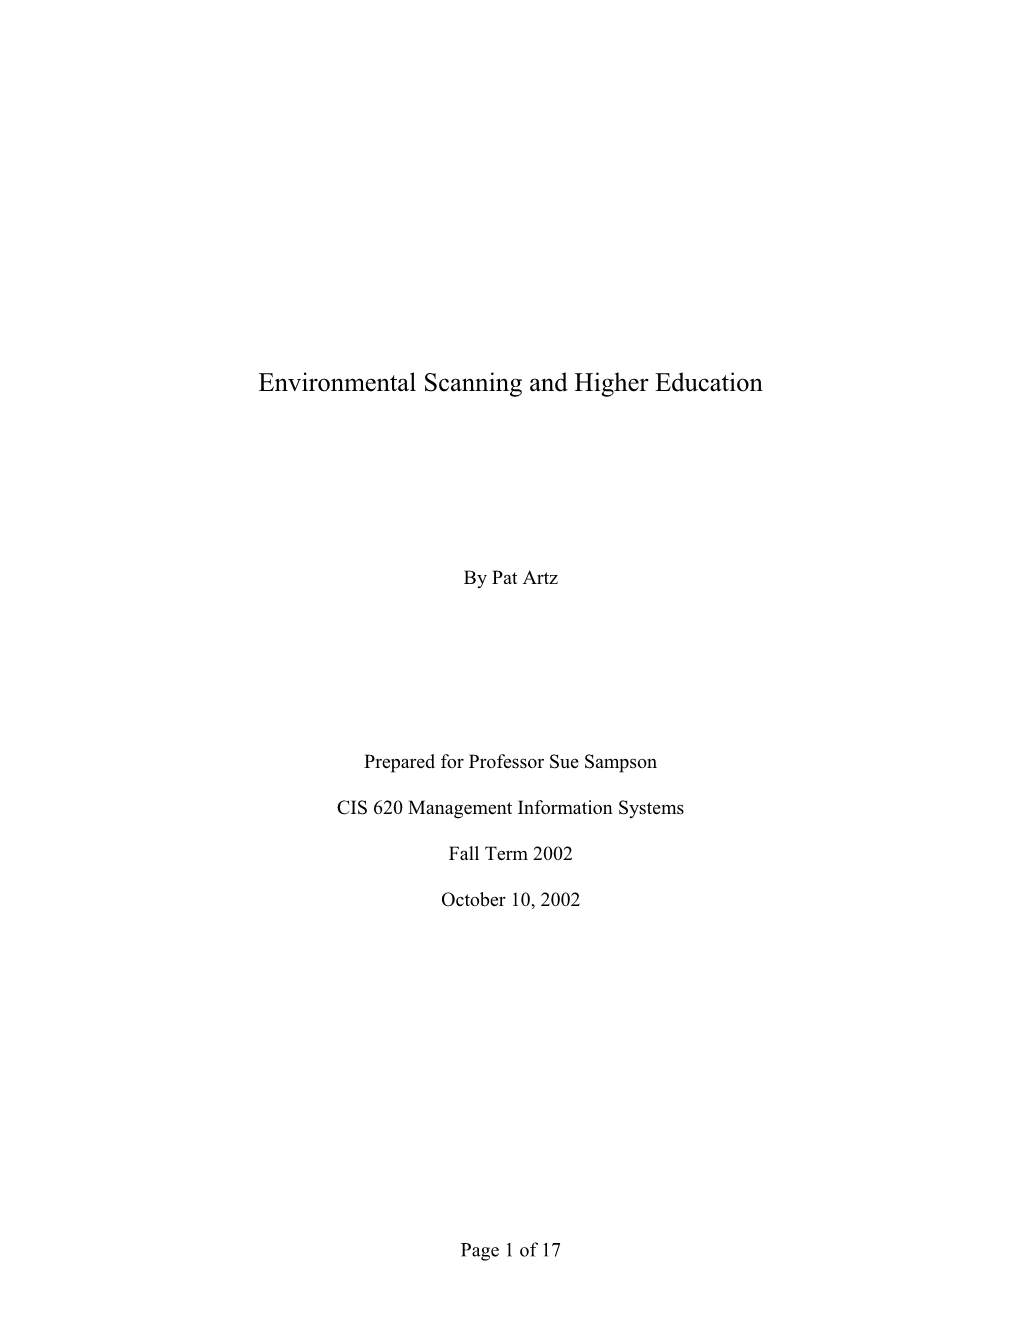 Environmental Scanning and Technology Education: a Case Study at Bellevue University S